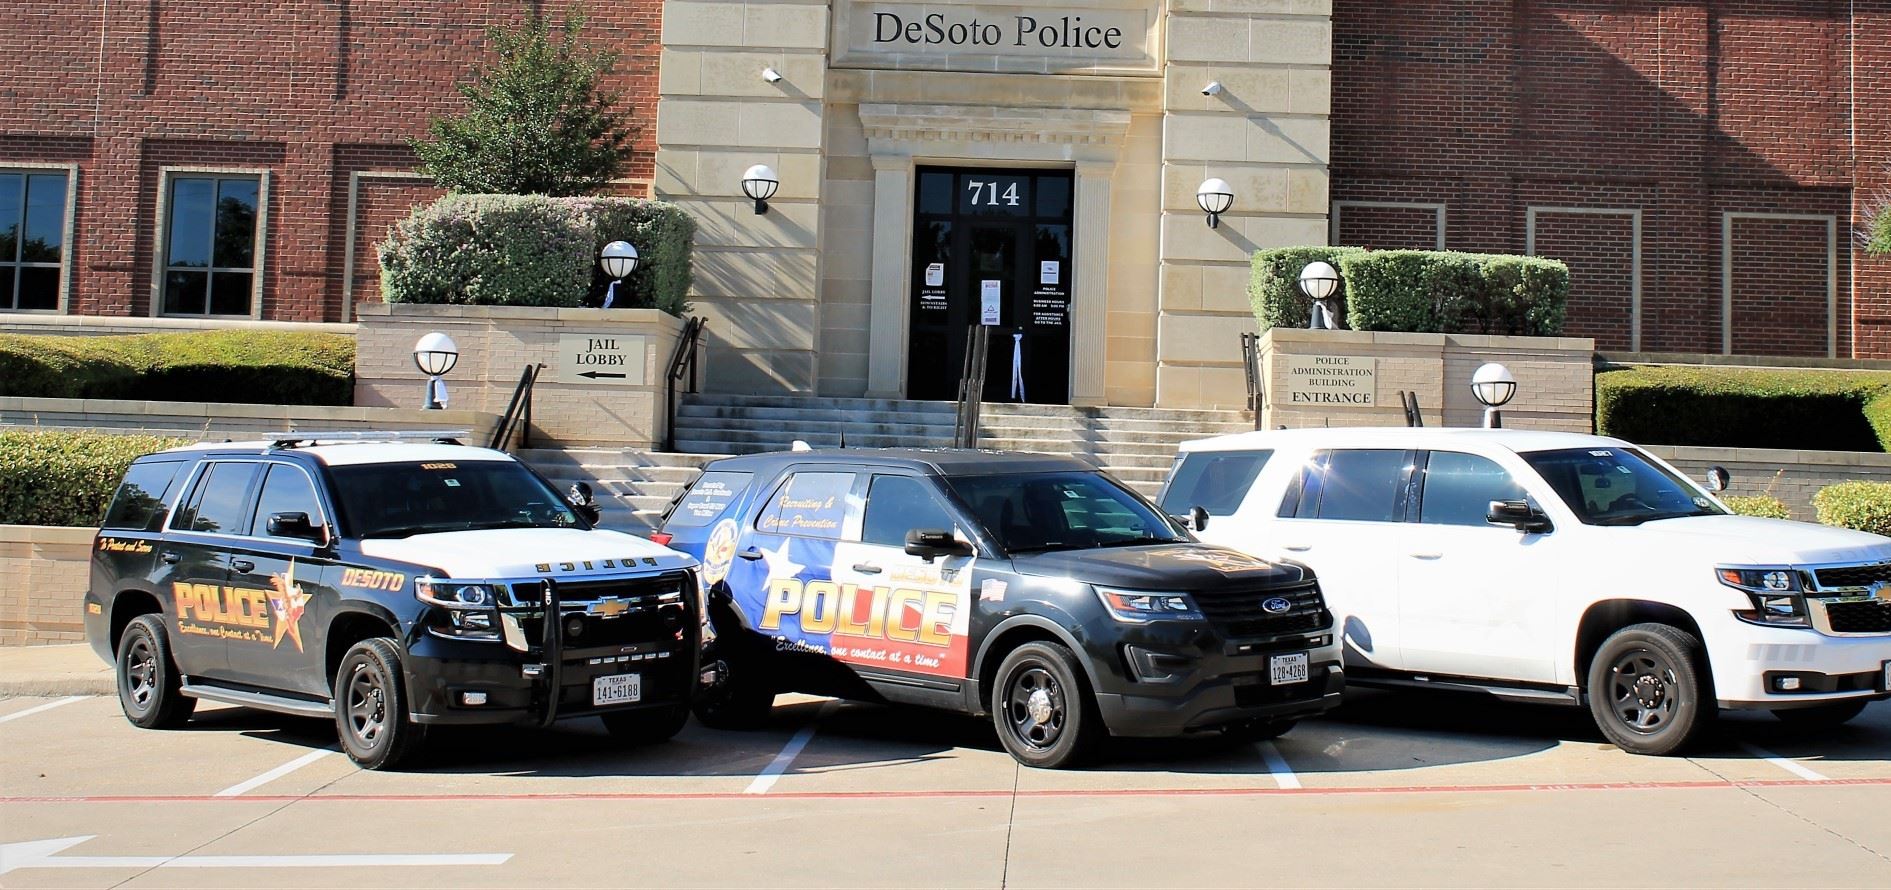 DeSoto Police Department to Issue $ 100 Weapons and Ammunition Cards